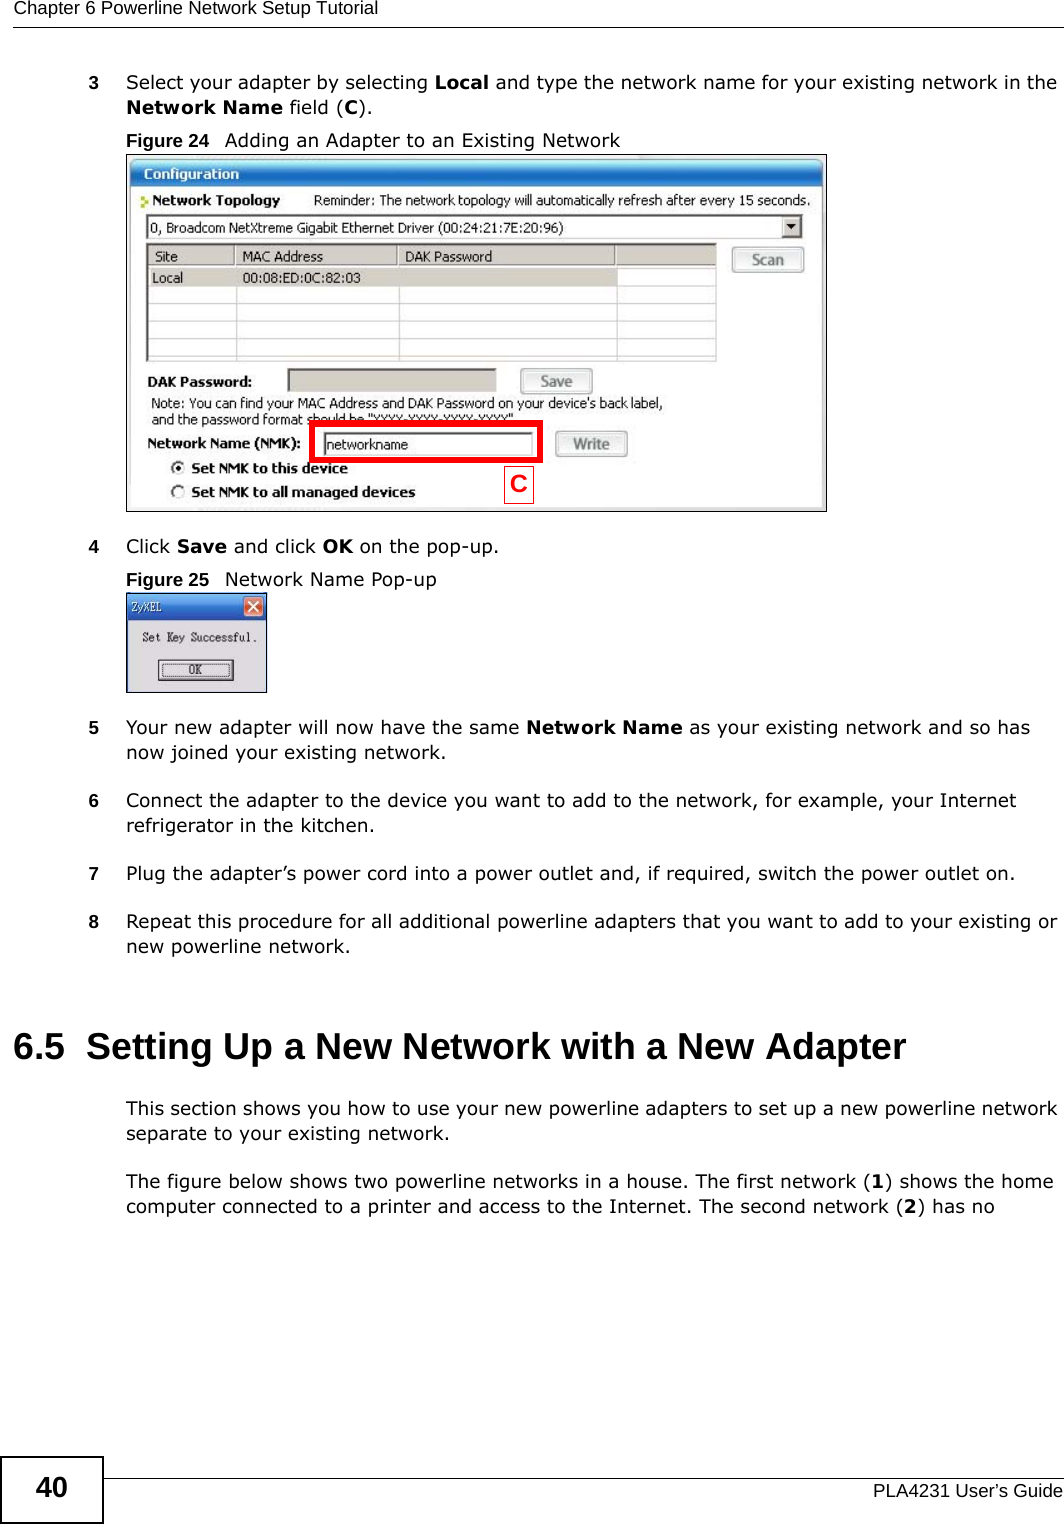 Chapter 6 Powerline Network Setup TutorialPLA4231 User’s Guide403Select your adapter by selecting Local and type the network name for your existing network in the Network Name field (C). Figure 24   Adding an Adapter to an Existing Network4Click Save and click OK on the pop-up. Figure 25   Network Name Pop-up5Your new adapter will now have the same Network Name as your existing network and so has now joined your existing network. 6Connect the adapter to the device you want to add to the network, for example, your Internet refrigerator in the kitchen. 7Plug the adapter’s power cord into a power outlet and, if required, switch the power outlet on. 8Repeat this procedure for all additional powerline adapters that you want to add to your existing or new powerline network.6.5  Setting Up a New Network with a New AdapterThis section shows you how to use your new powerline adapters to set up a new powerline network separate to your existing network.The figure below shows two powerline networks in a house. The first network (1) shows the home computer connected to a printer and access to the Internet. The second network (2) has no C